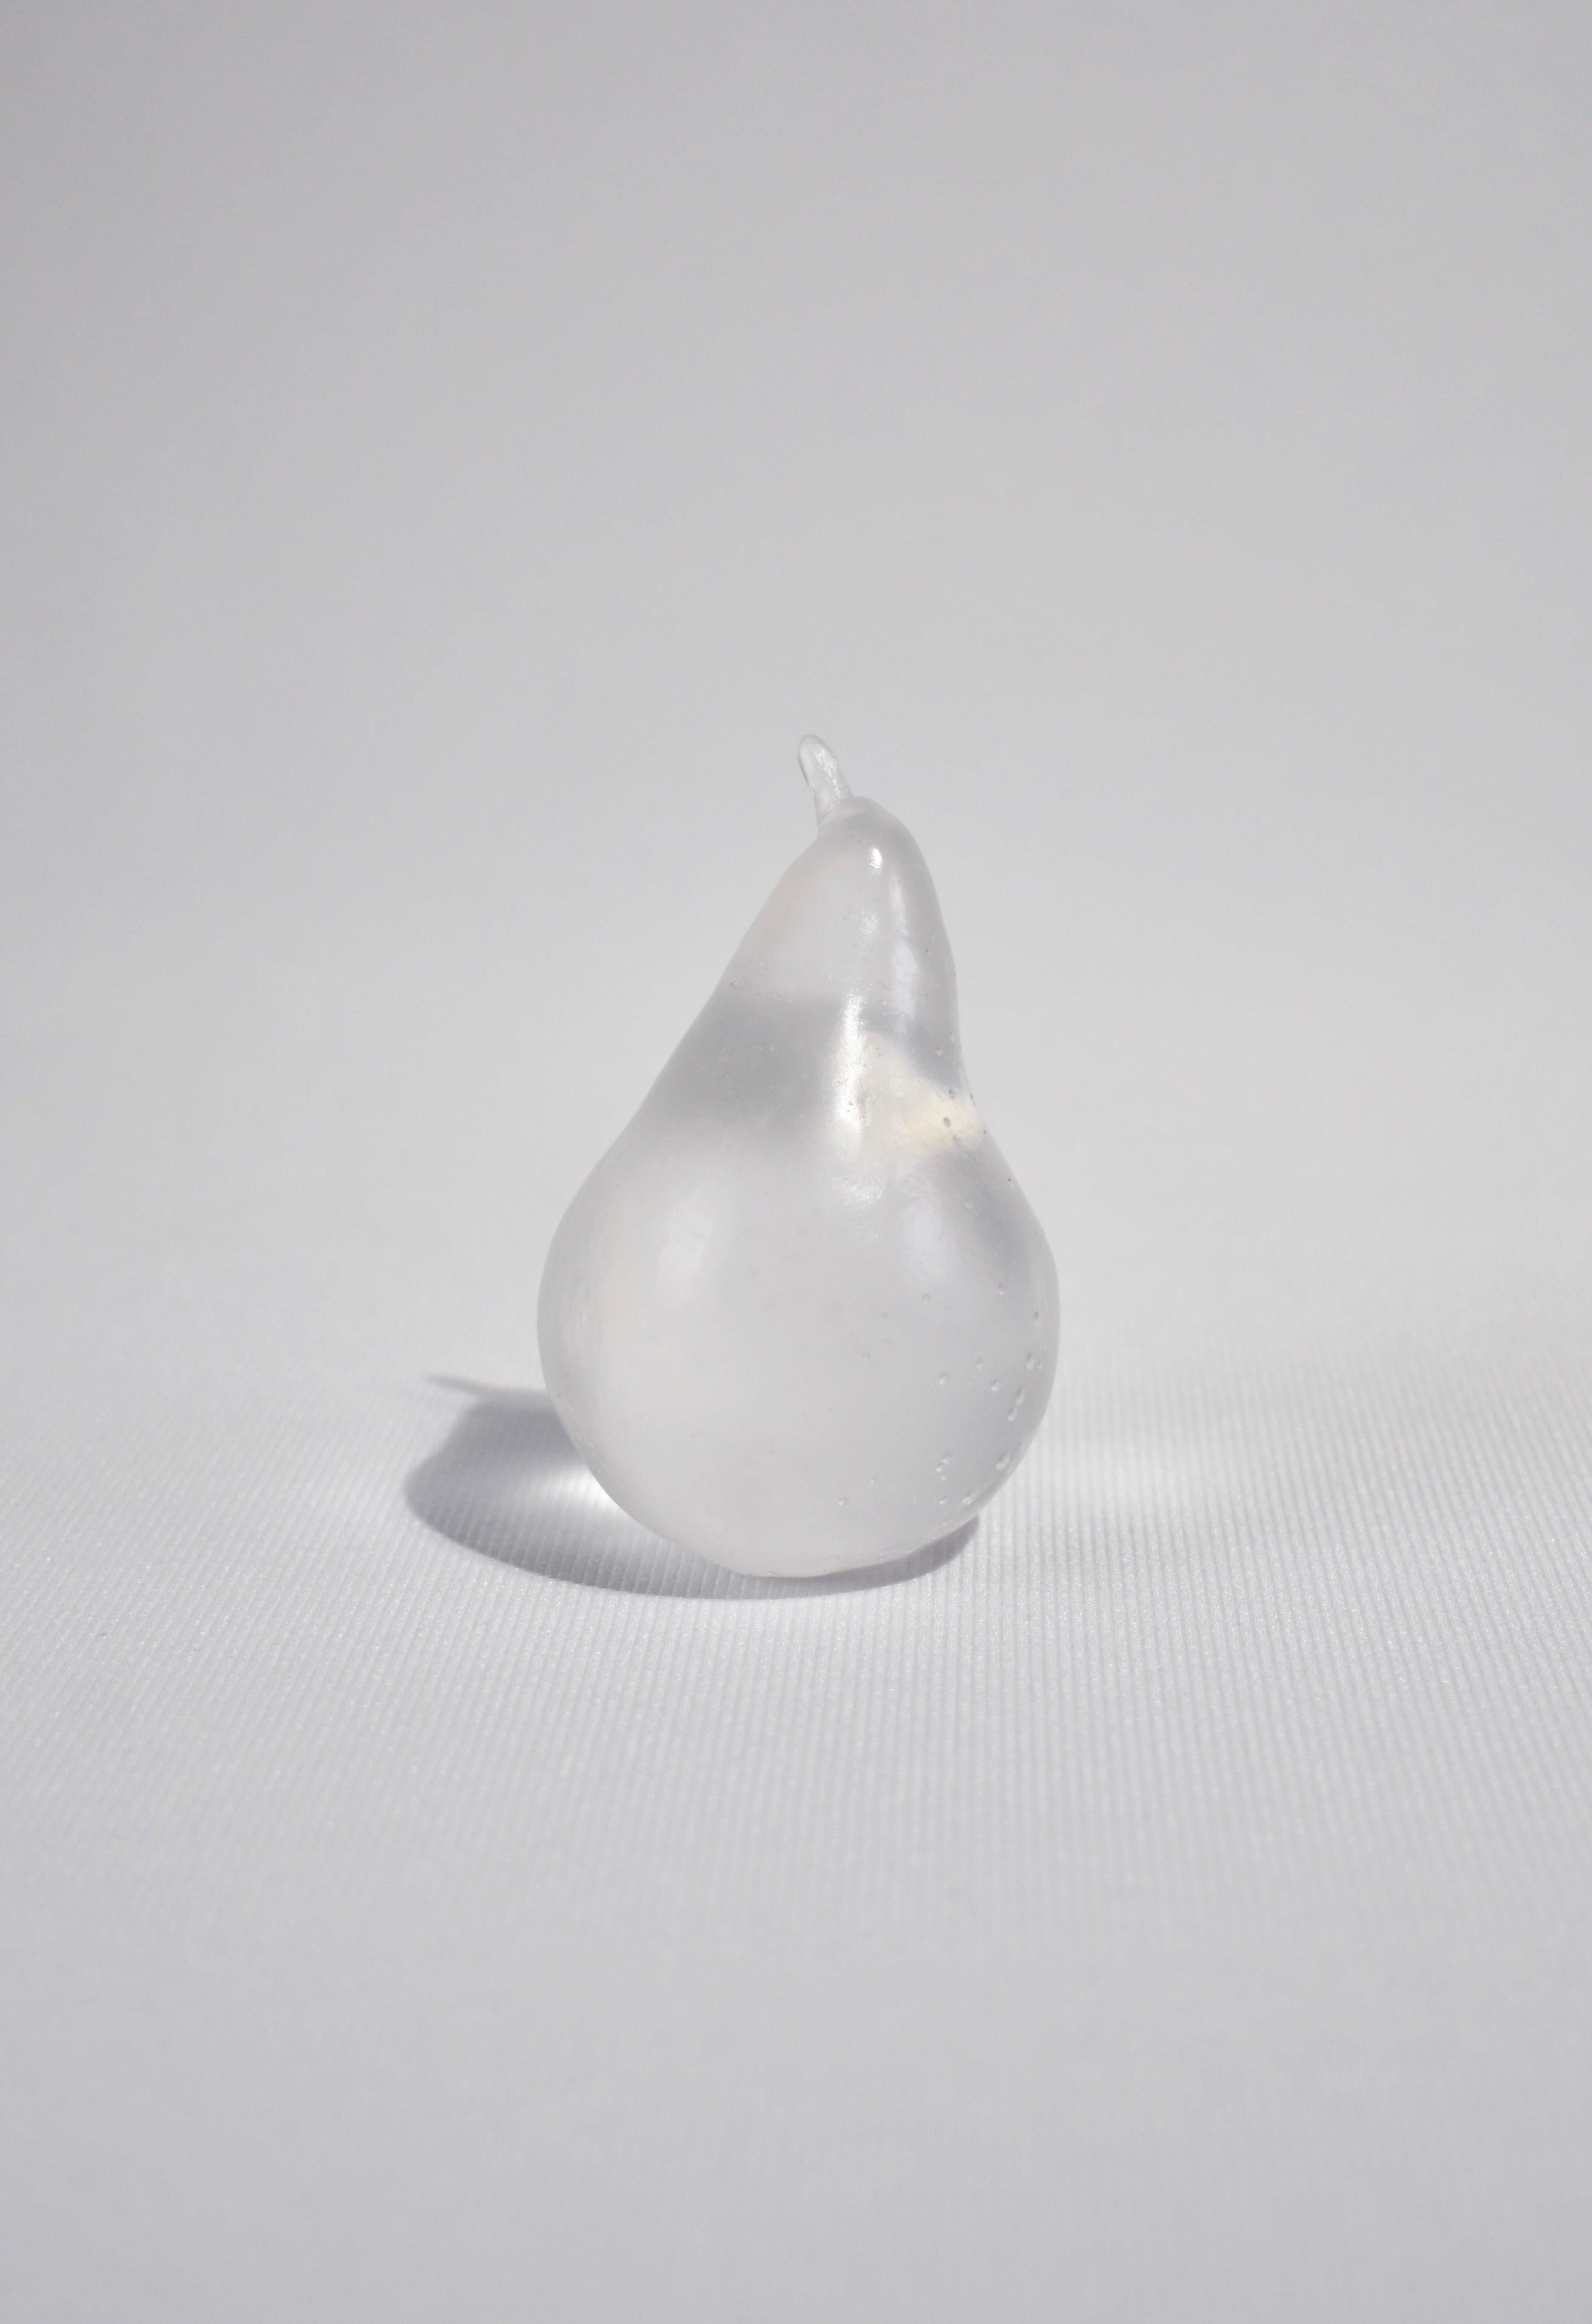 Casted glass pear in clear by Devon Made Glass Fruit inspired by blown glass fruit makers and collectors from the 1960's. The light playful approach to everyday fruit is contrasted with the heaviness of the crystal glass, a unique material that